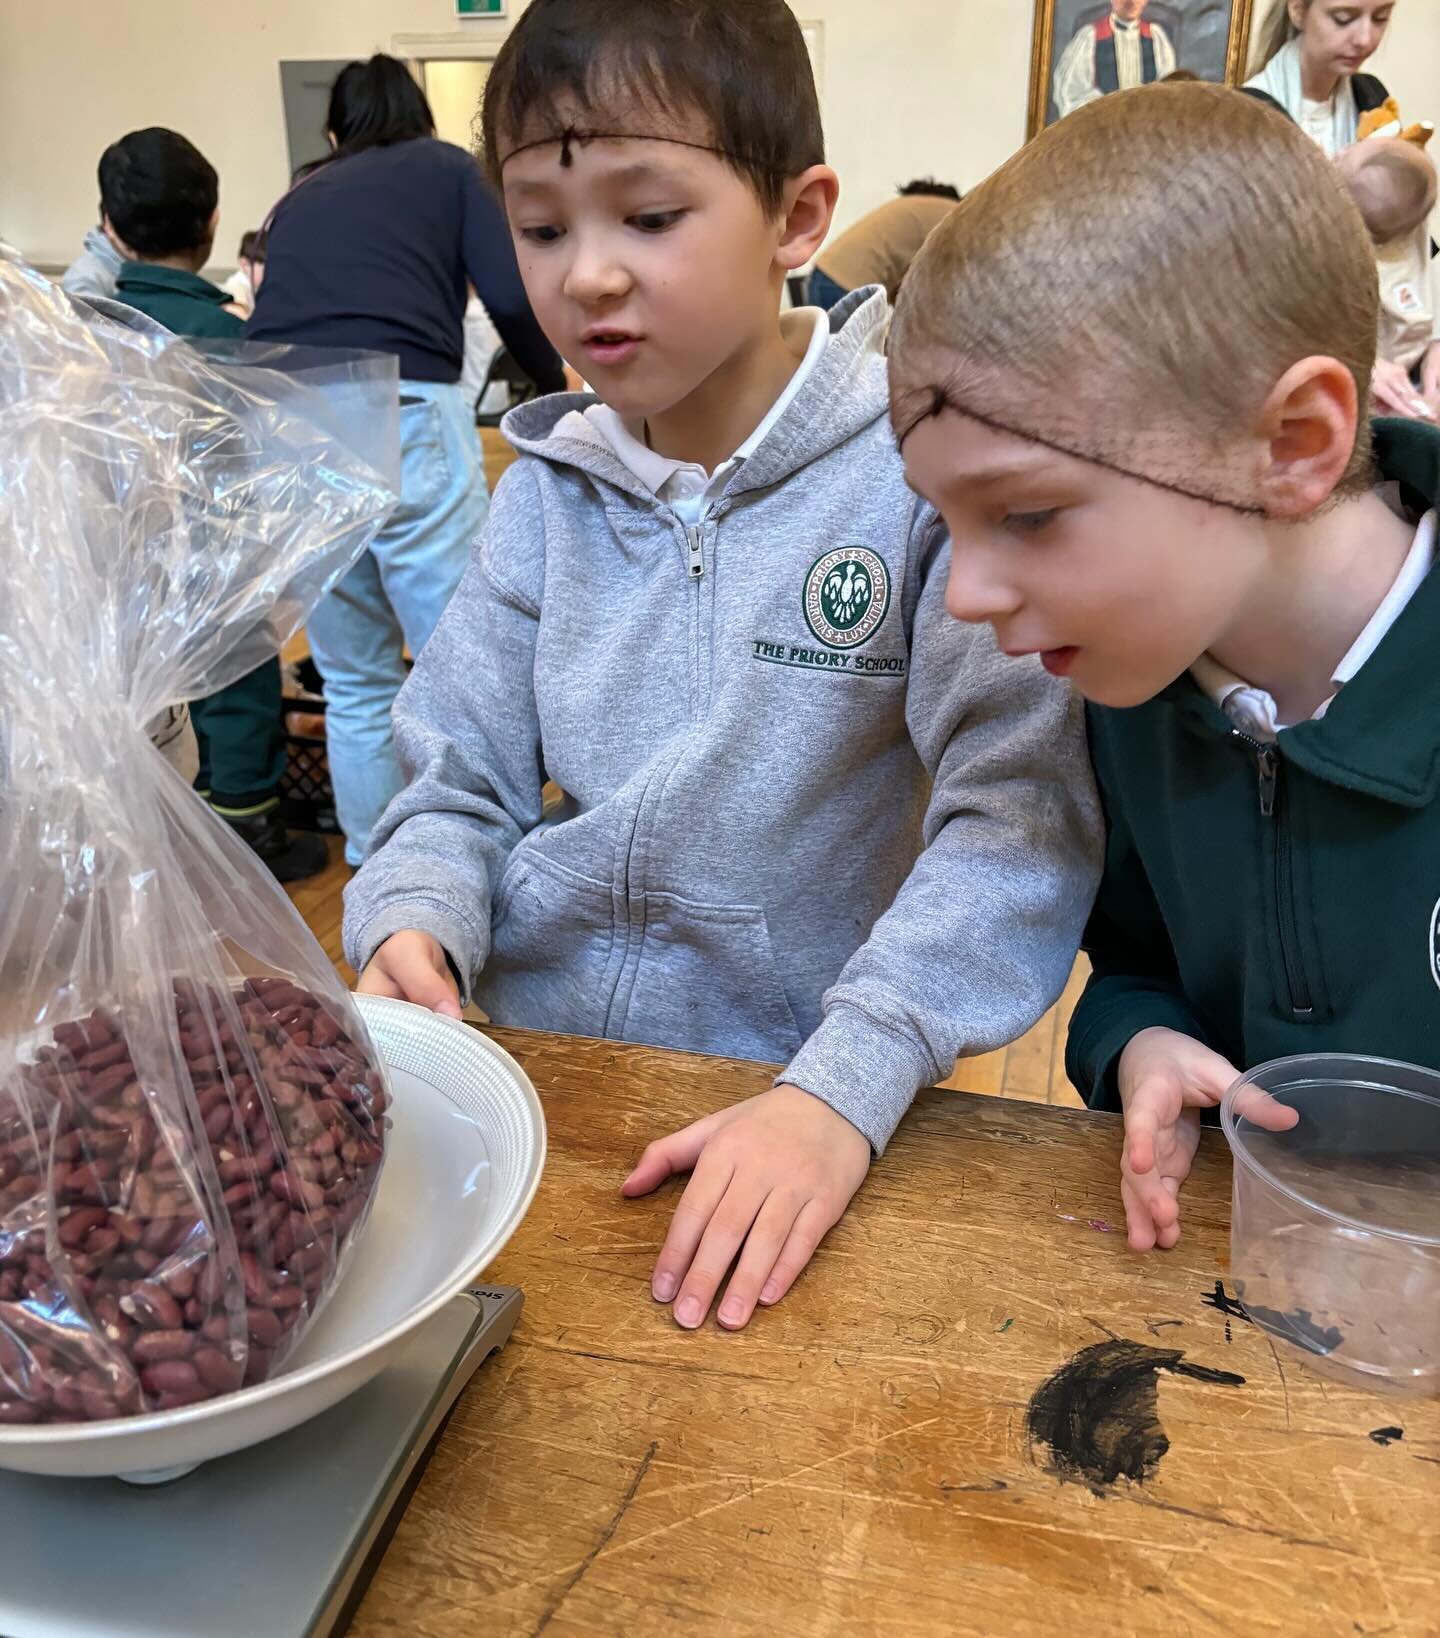 Our first-graders visited Innovation Assistance, where they presented their donation and had the opportunity to not only learn about the operations of the Food Bank but also to engage in hands-on activities such as packing food, baking chocolate bana